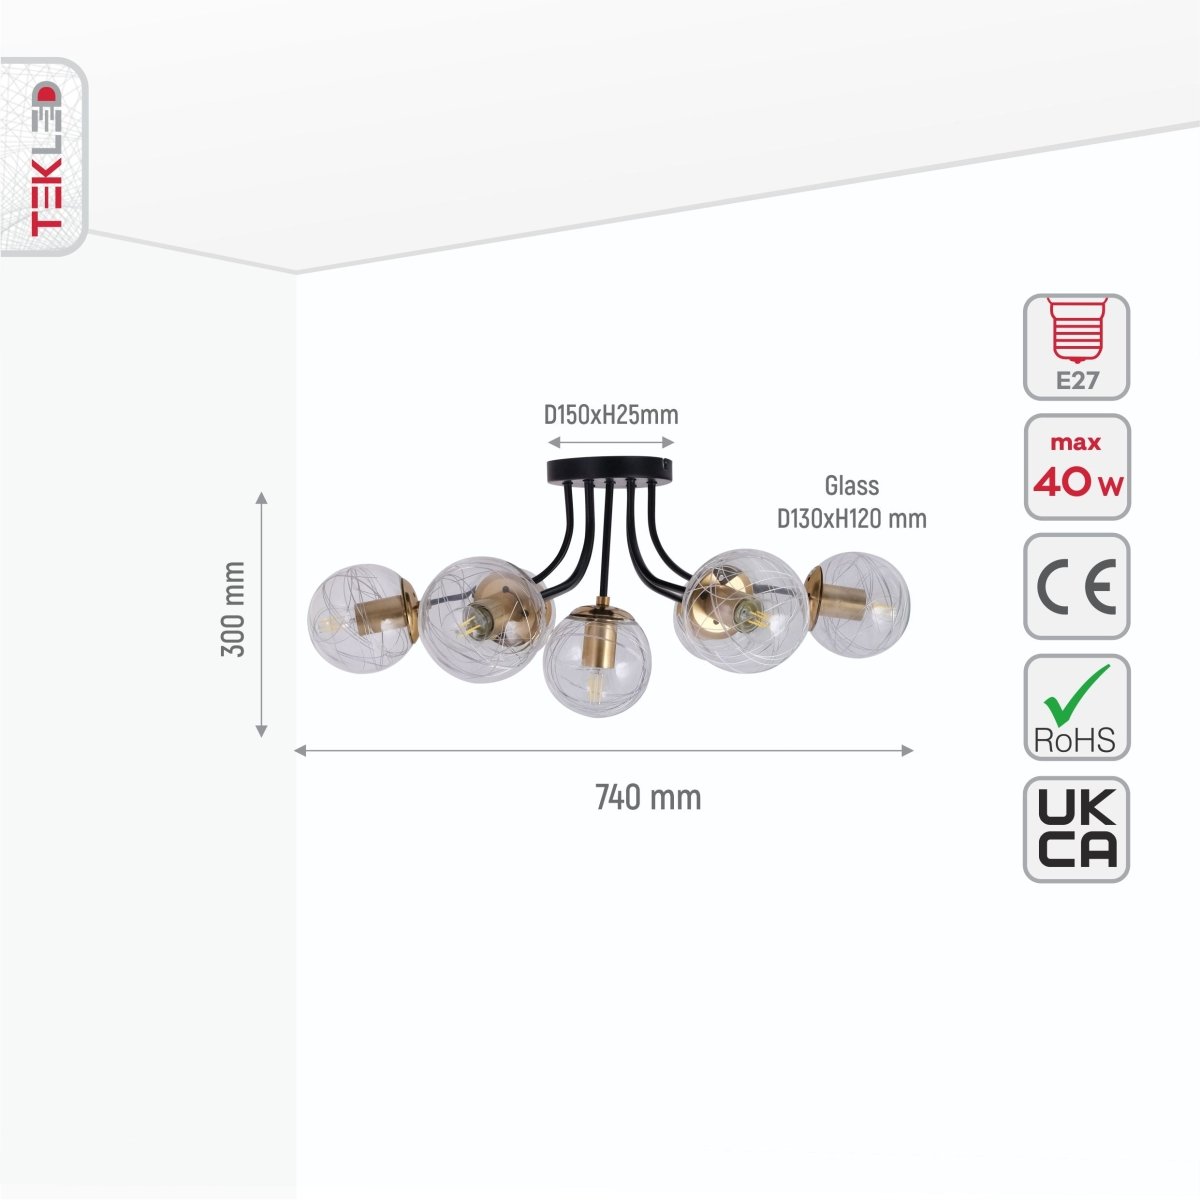 Size and specs of Clear Globe Glass Black Metal Semi Flush Ceiling Light with 7xE27 Fittings | TEKLED 159-17416